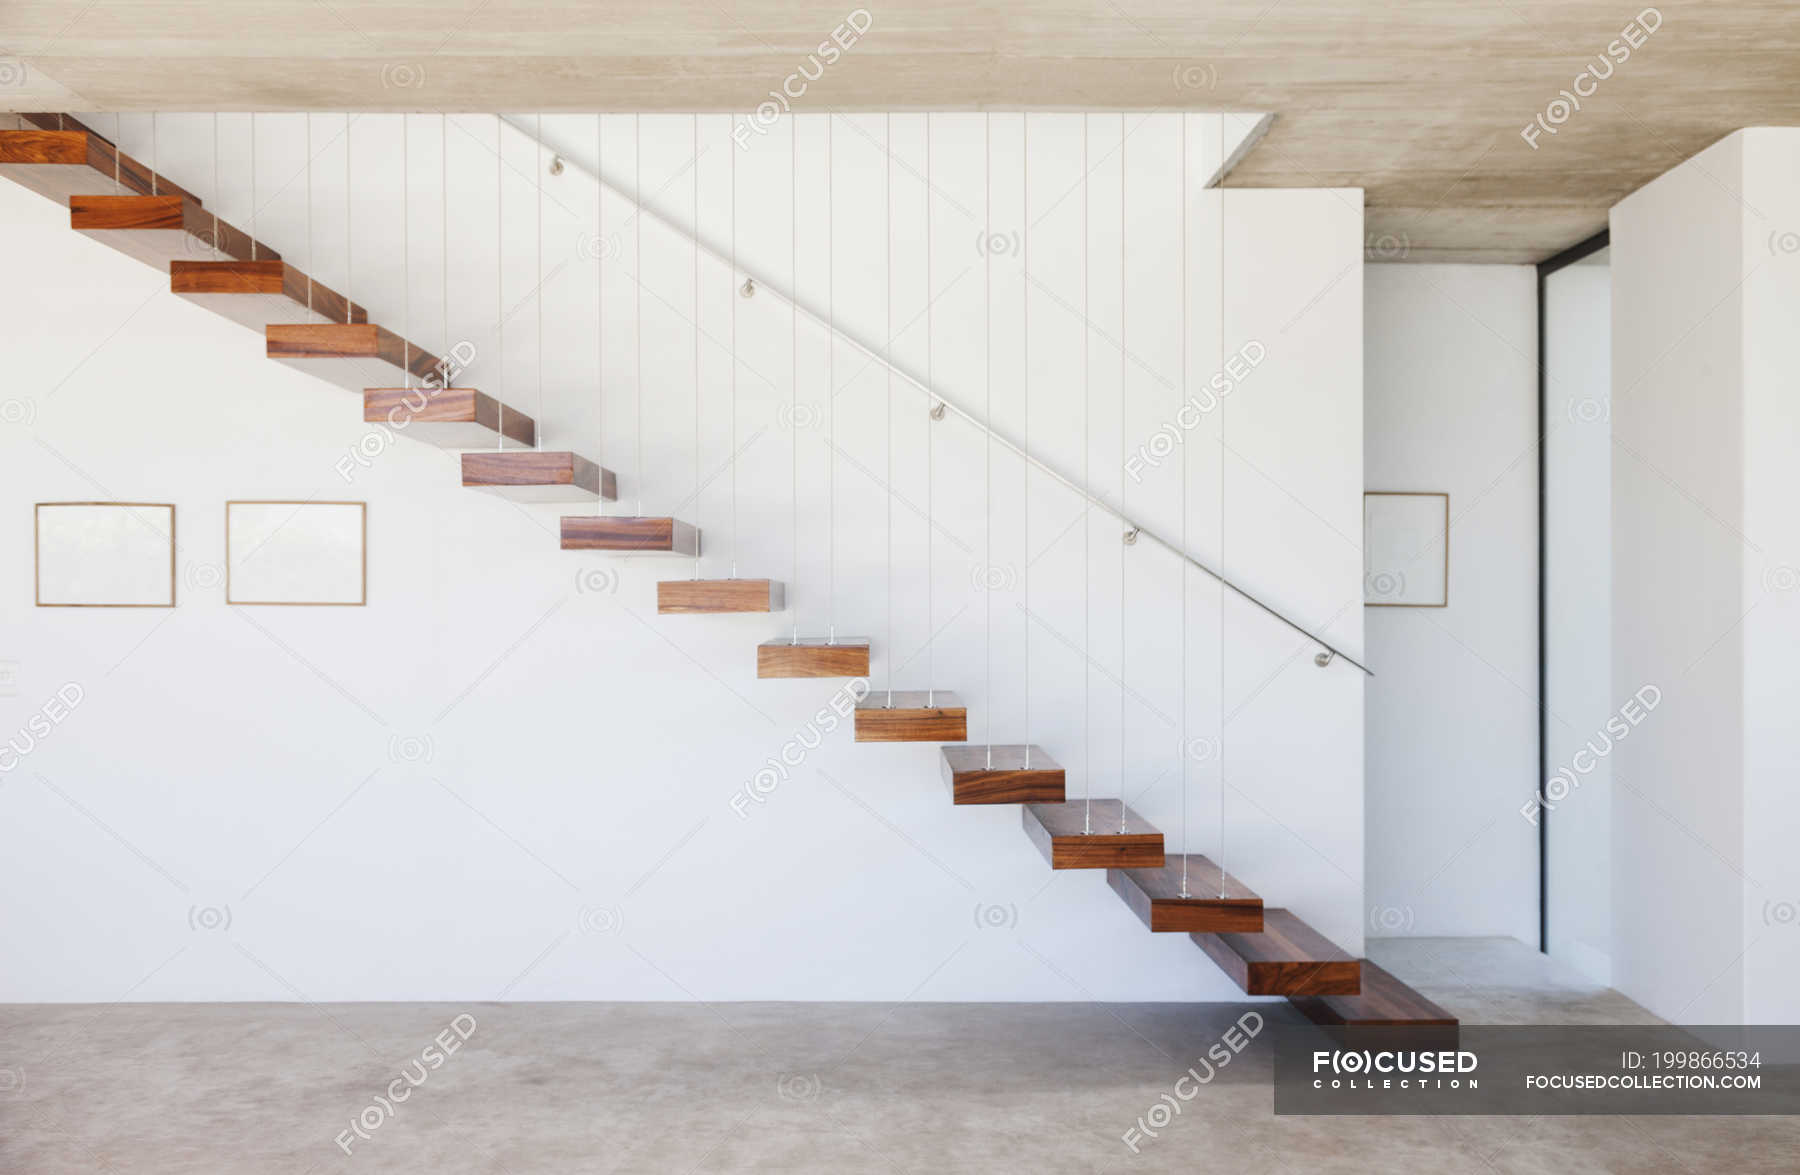 focused 199866534 stock photo side view floating staircase modern